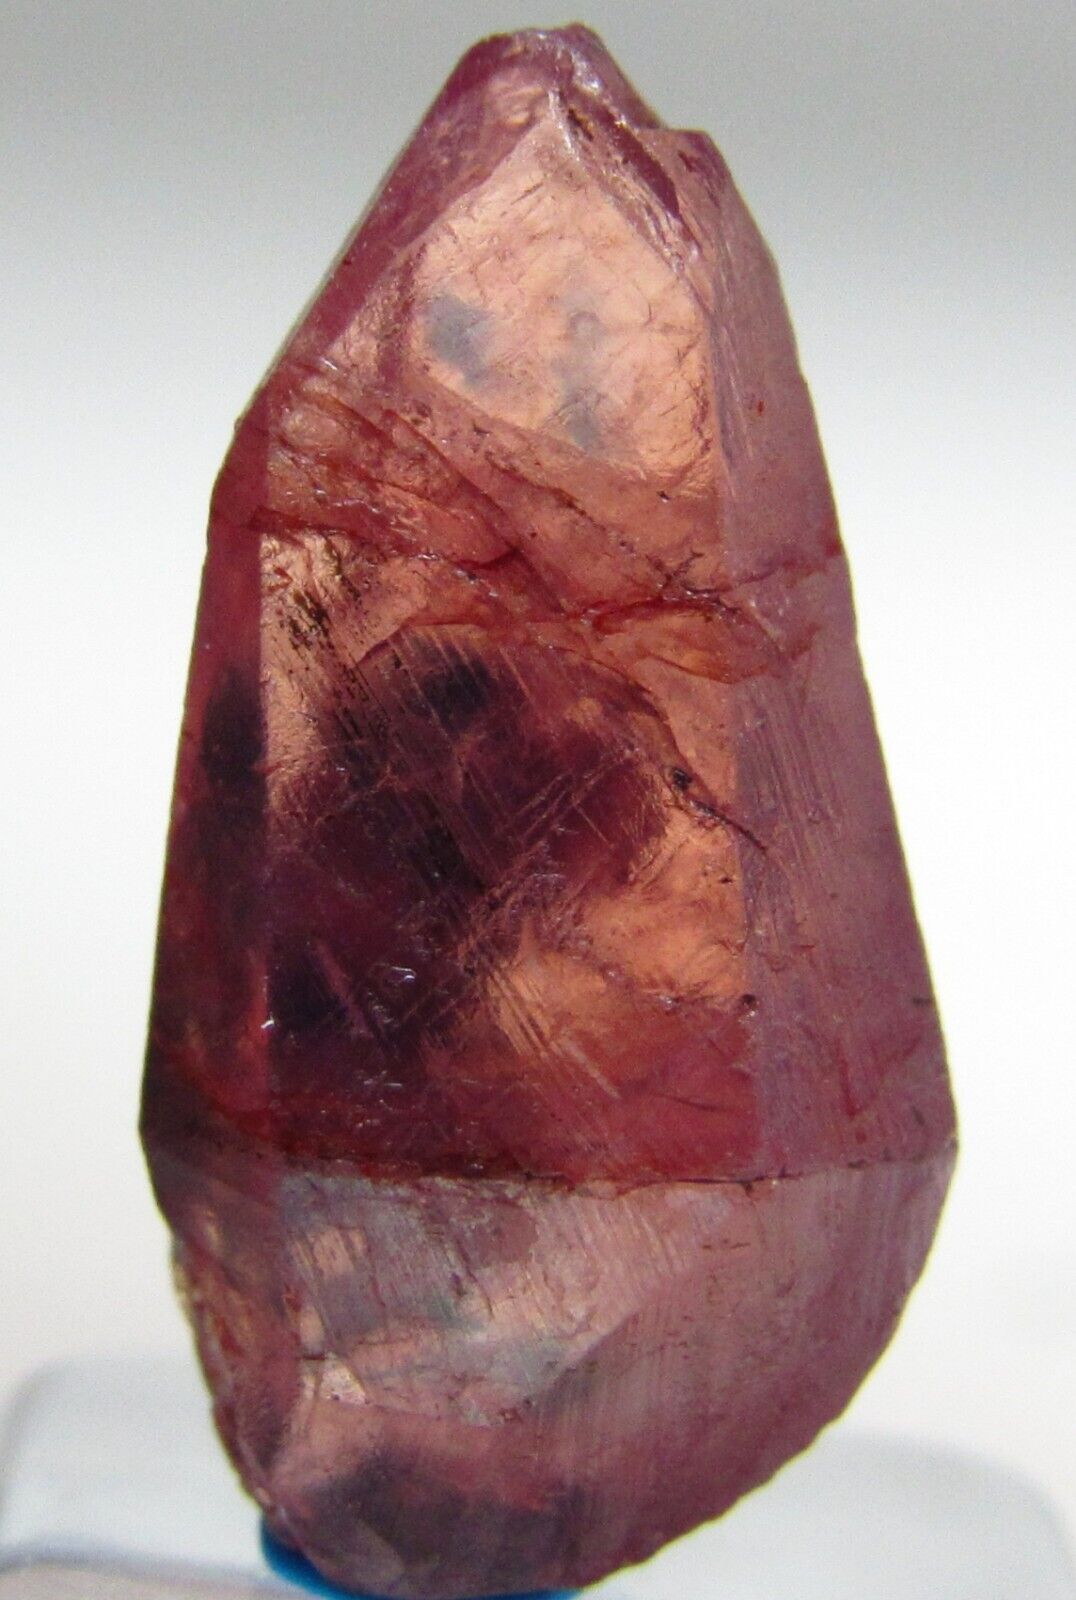 EXTRAVAGANT FINE DOUBLE TERMINATED GEM CLEAR RUBY CRYSTAL WINZA TANZANIA